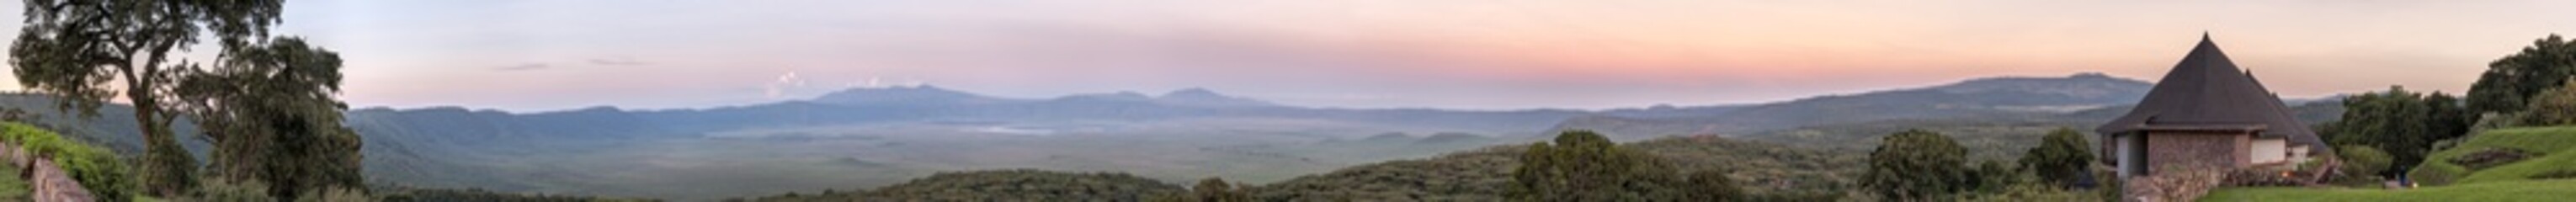 Panoramic view of huge Ngorongoro caldera (extinct volcano crater) with lodge hotel bungalows against sunrise glow background. Great Rift Valley, Tanzania, East Africa. 
